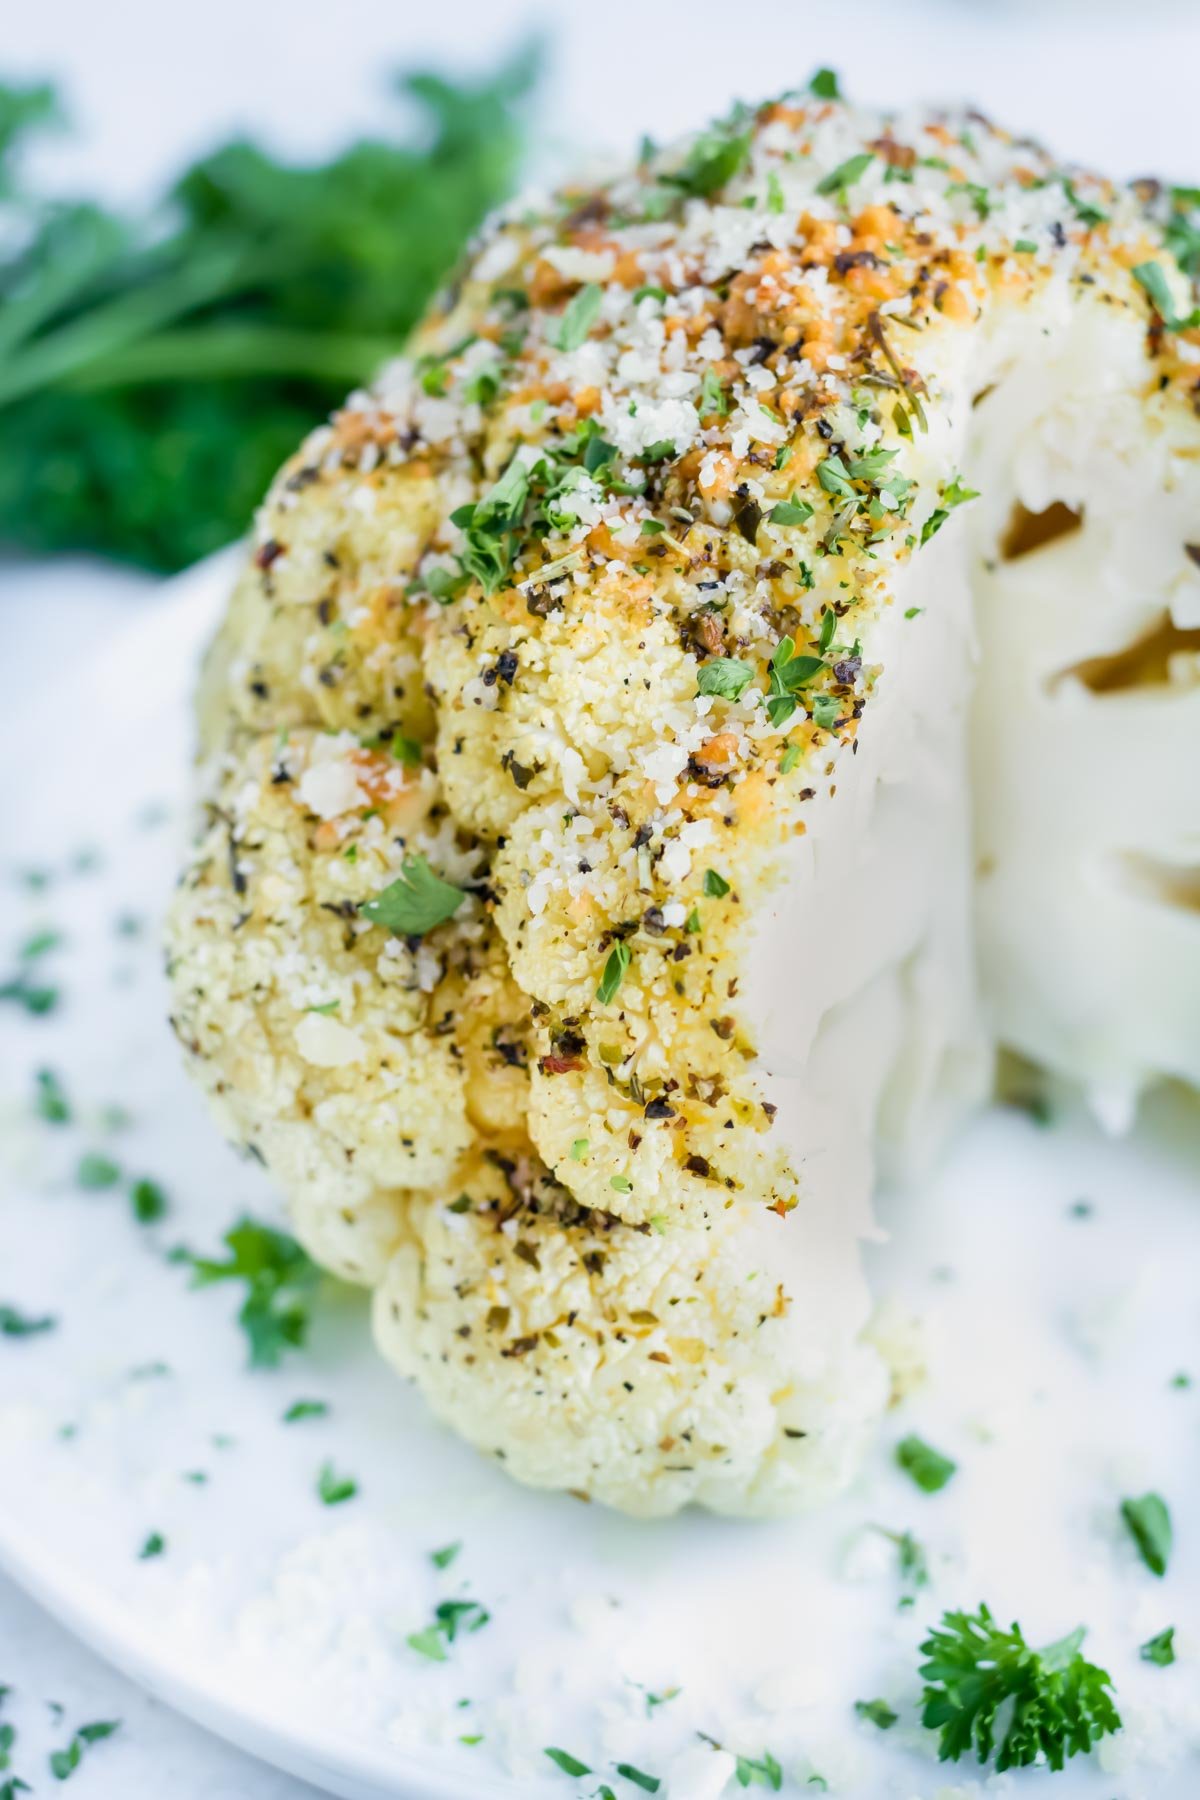 This vegan whole roasted cauliflower is baked in the oven for a low-carb and keto recipe.